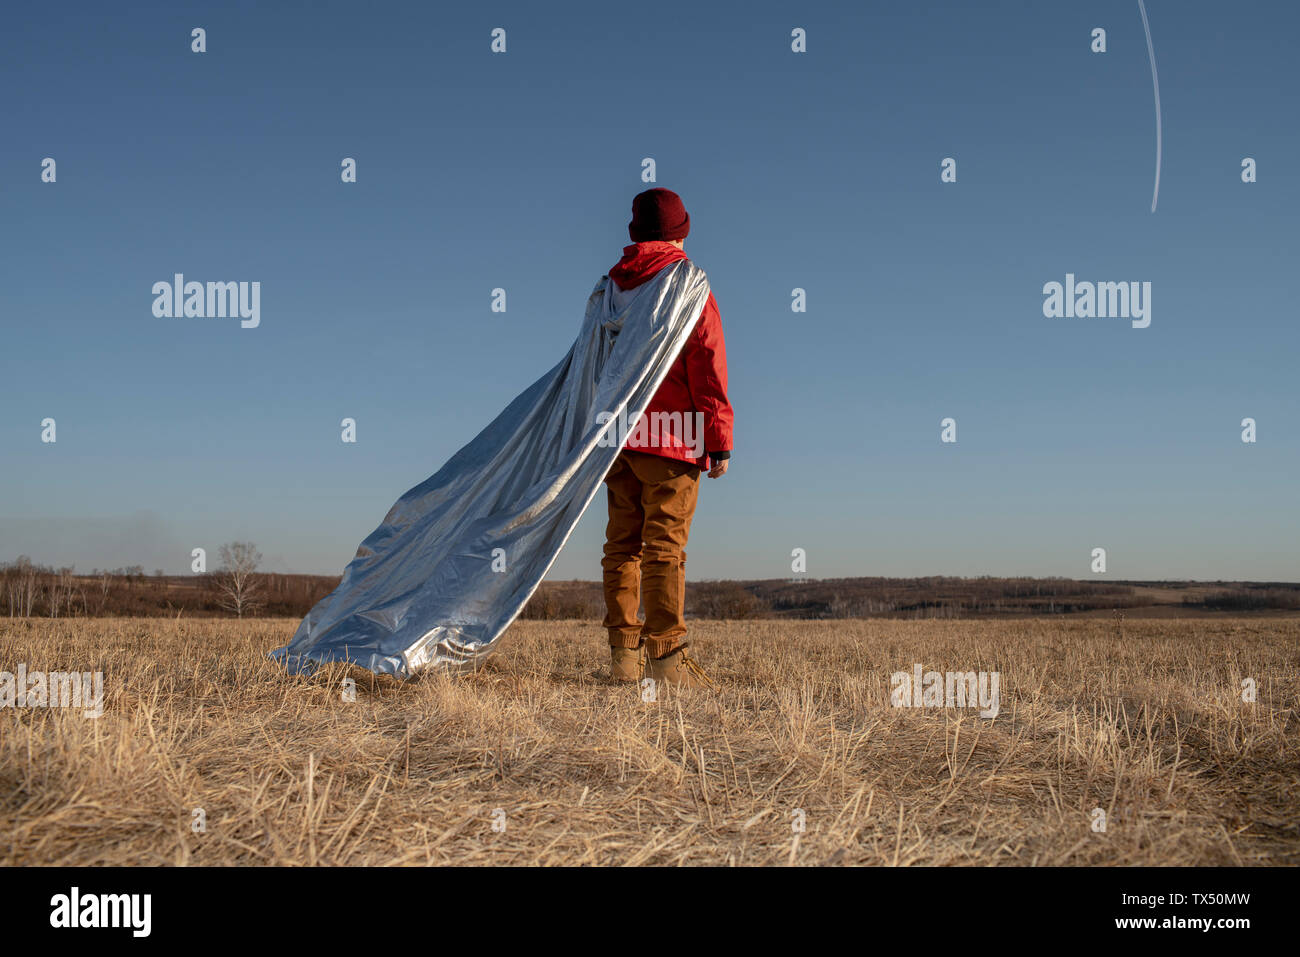 Rear view of boy dressed up as superhero looking at vapour trails in the sky Stock Photo